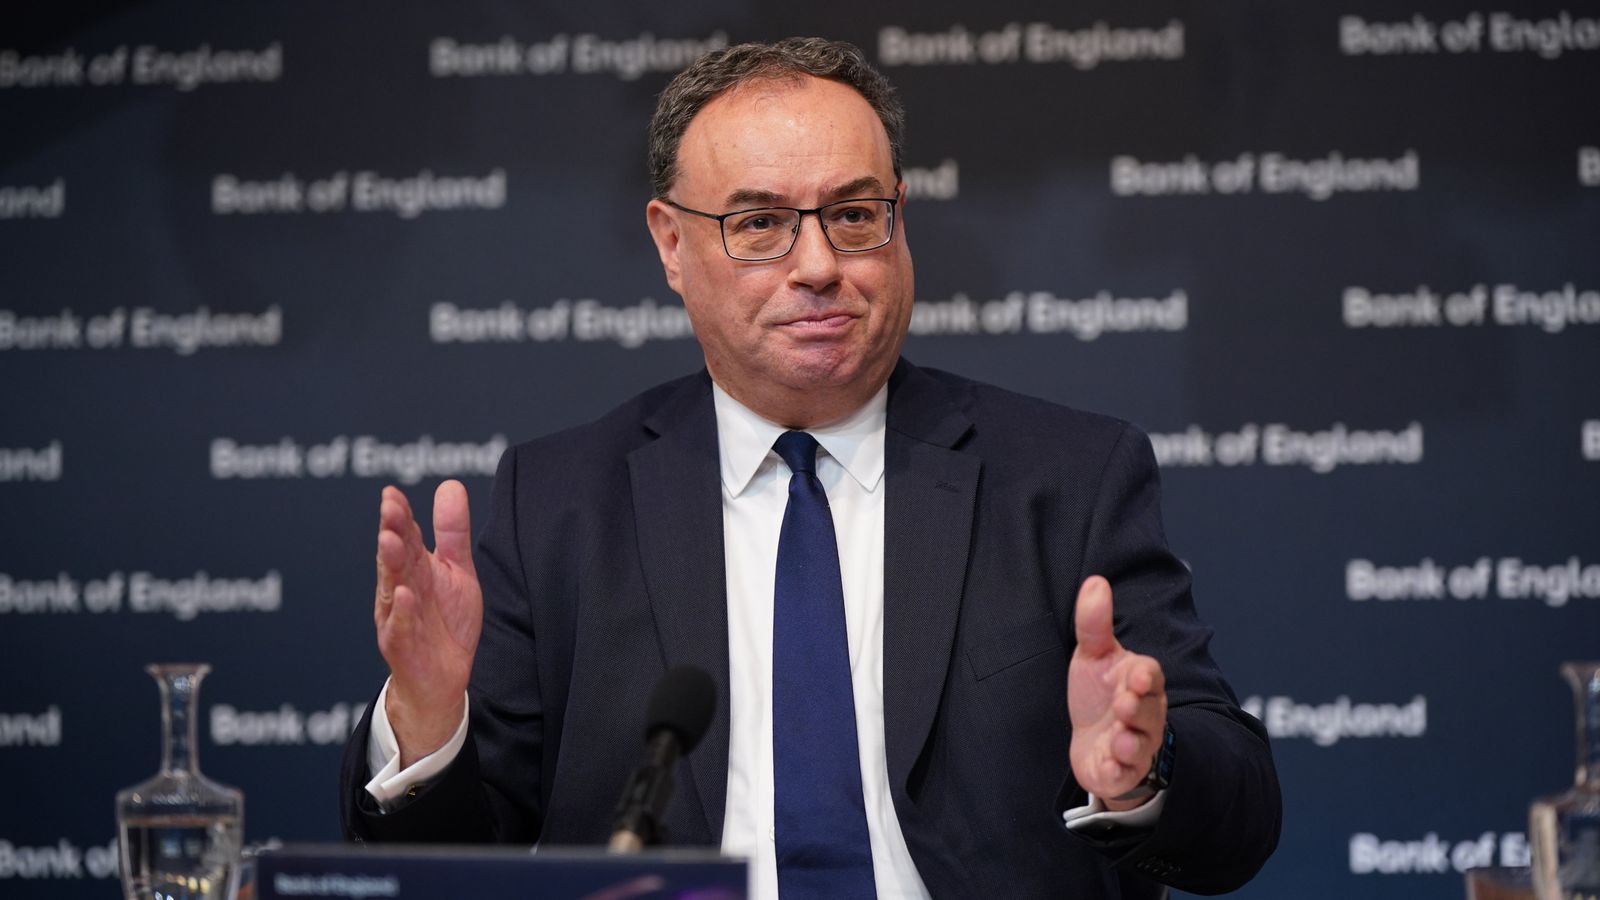 UK banking 'resilient' and inflation fight remains top focus, says Bank of England Governor Andrew Bailey